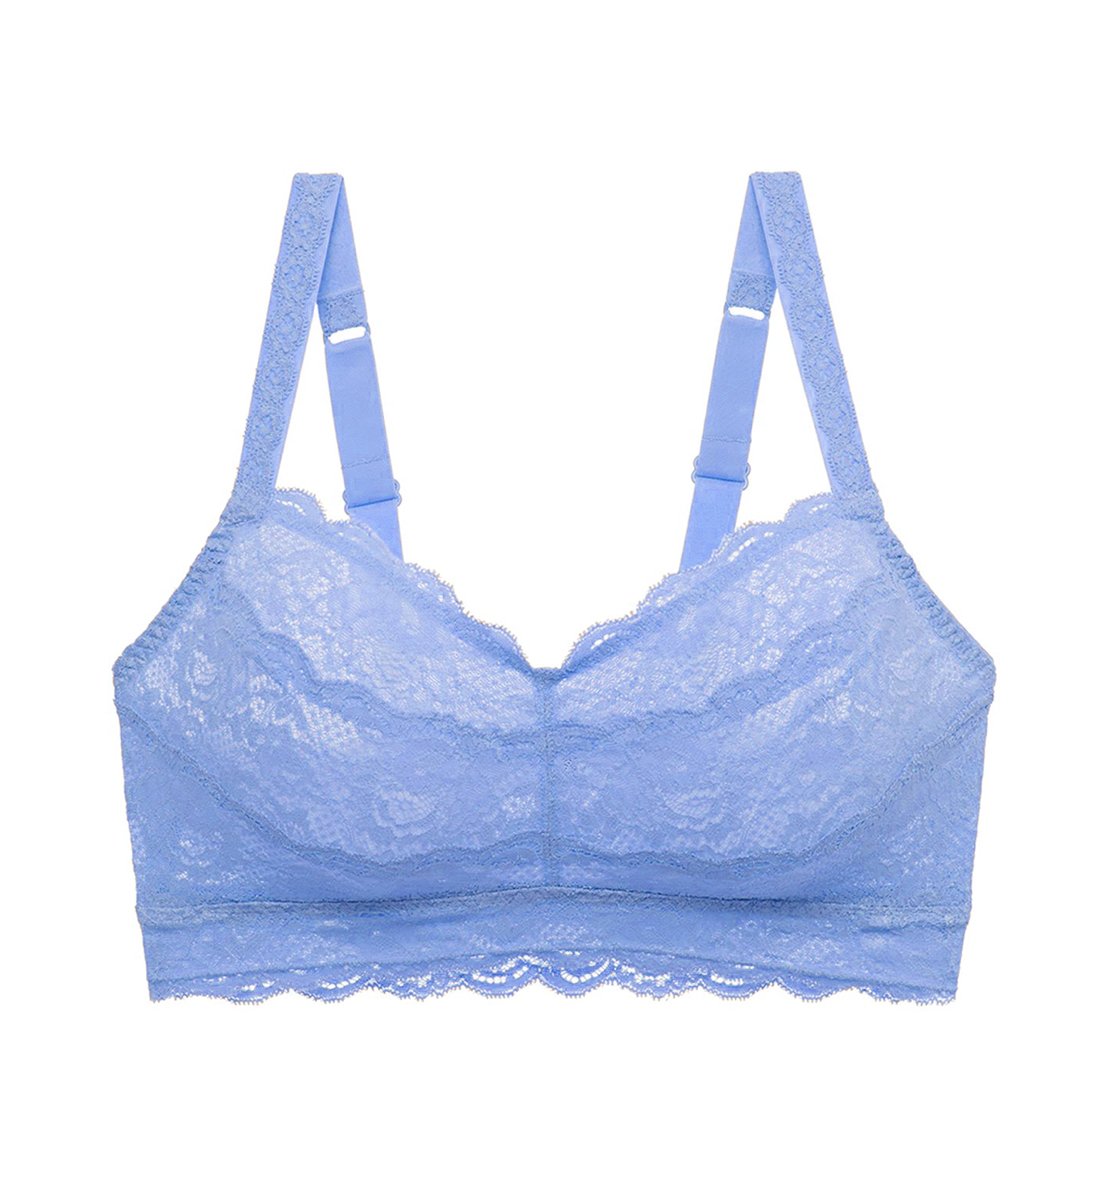 Padded Bra in colour blue moon from the Cotton Lace collection